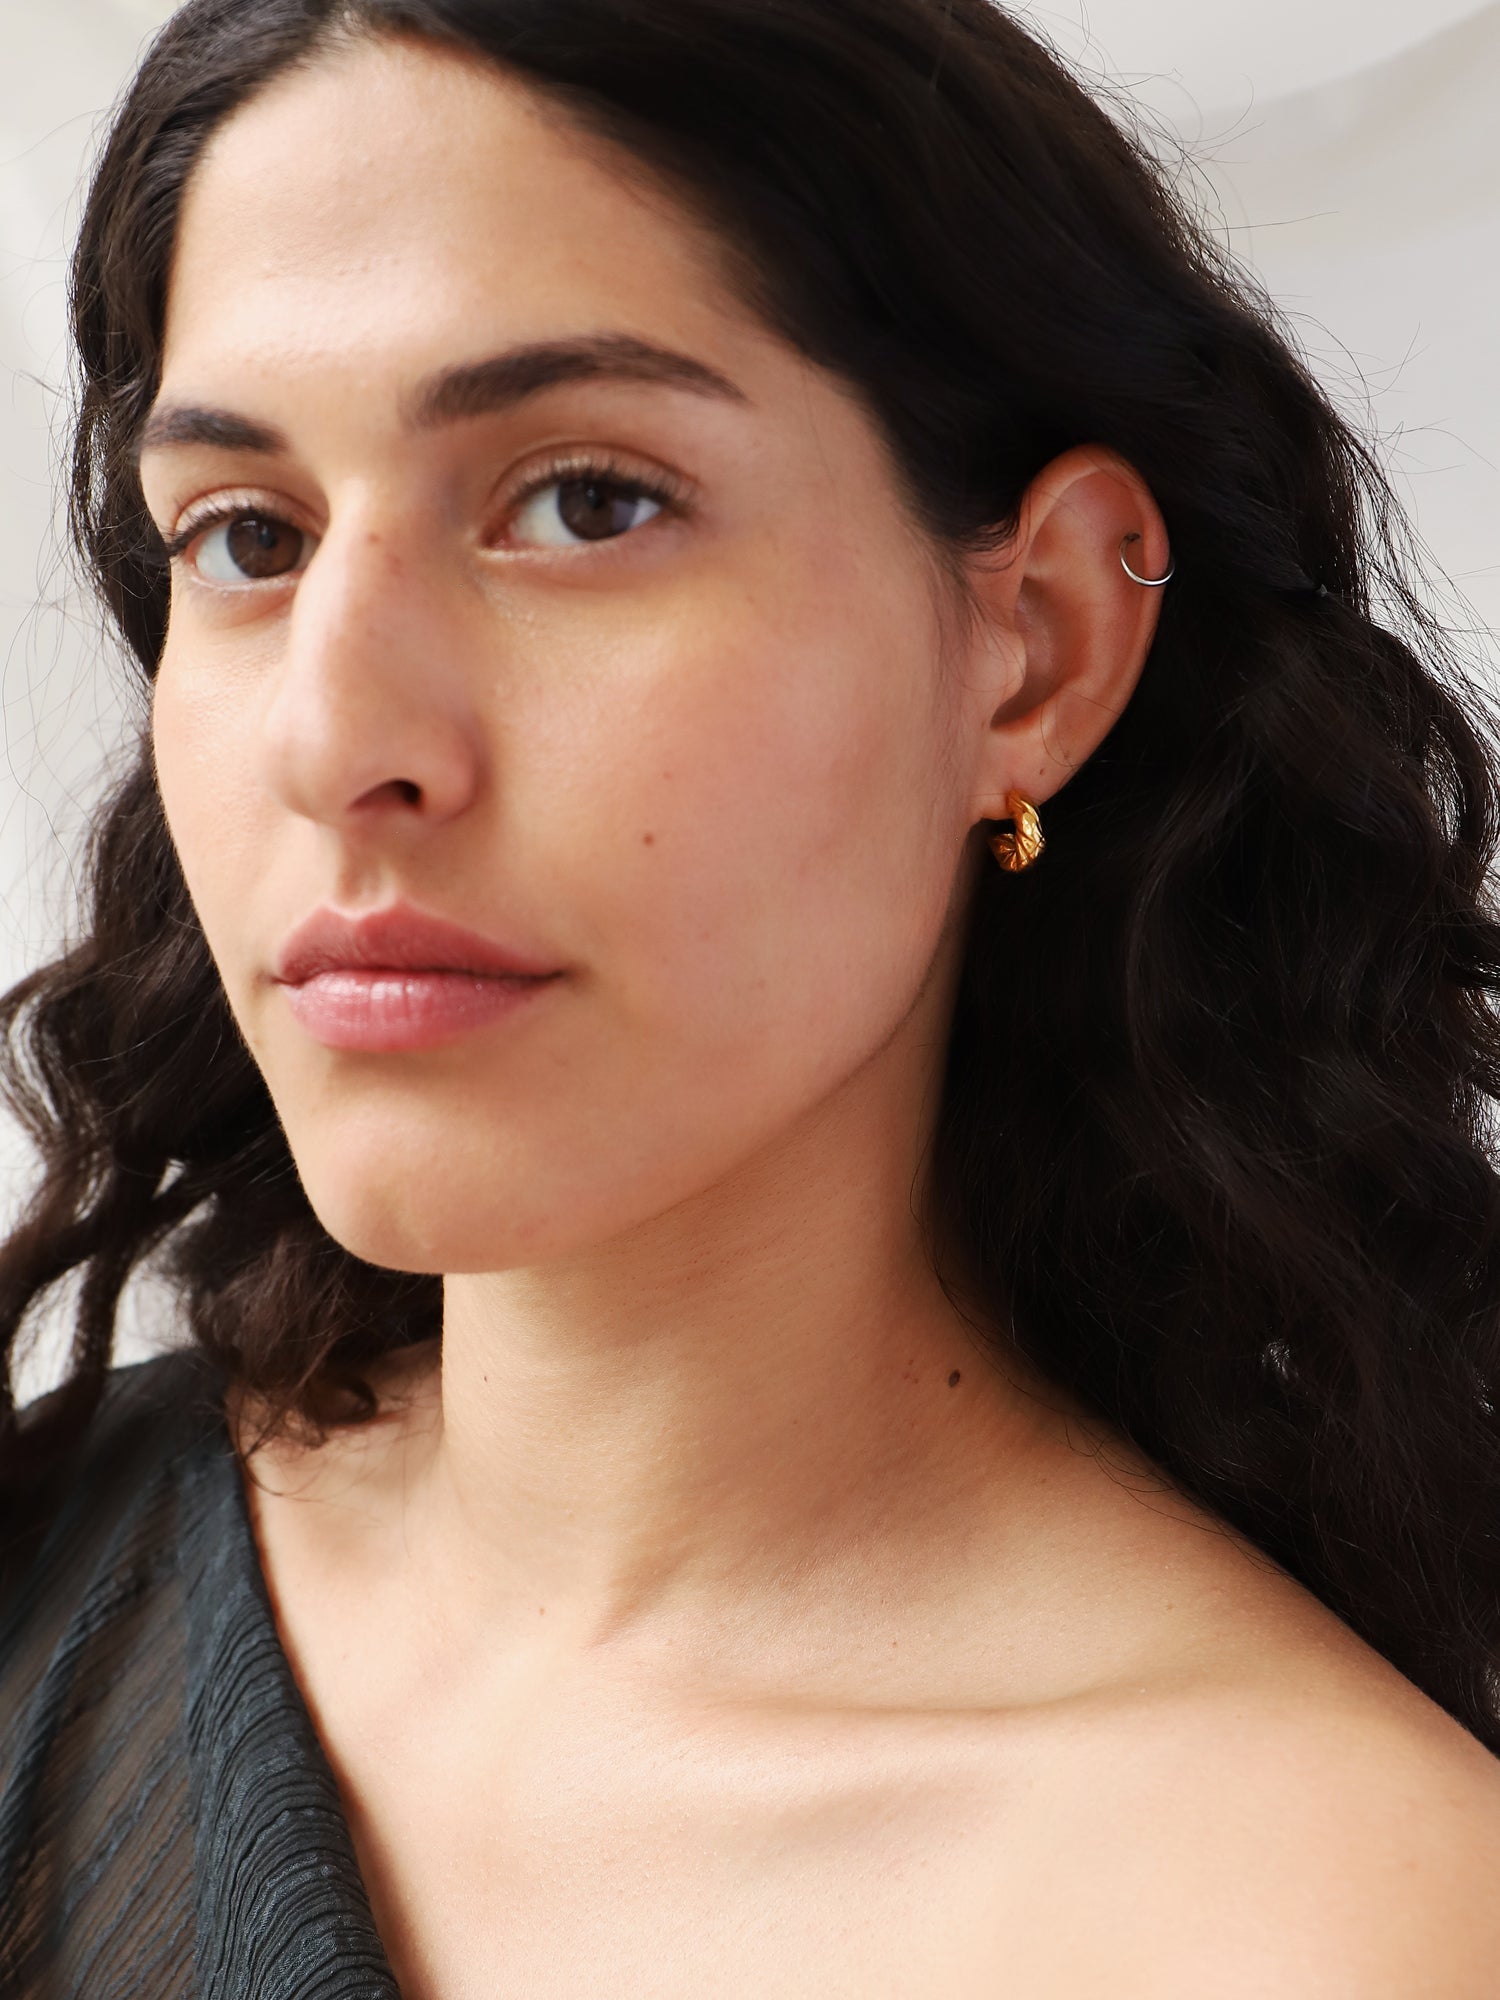 In a Twist Hoops - Gold Plated Vermeil